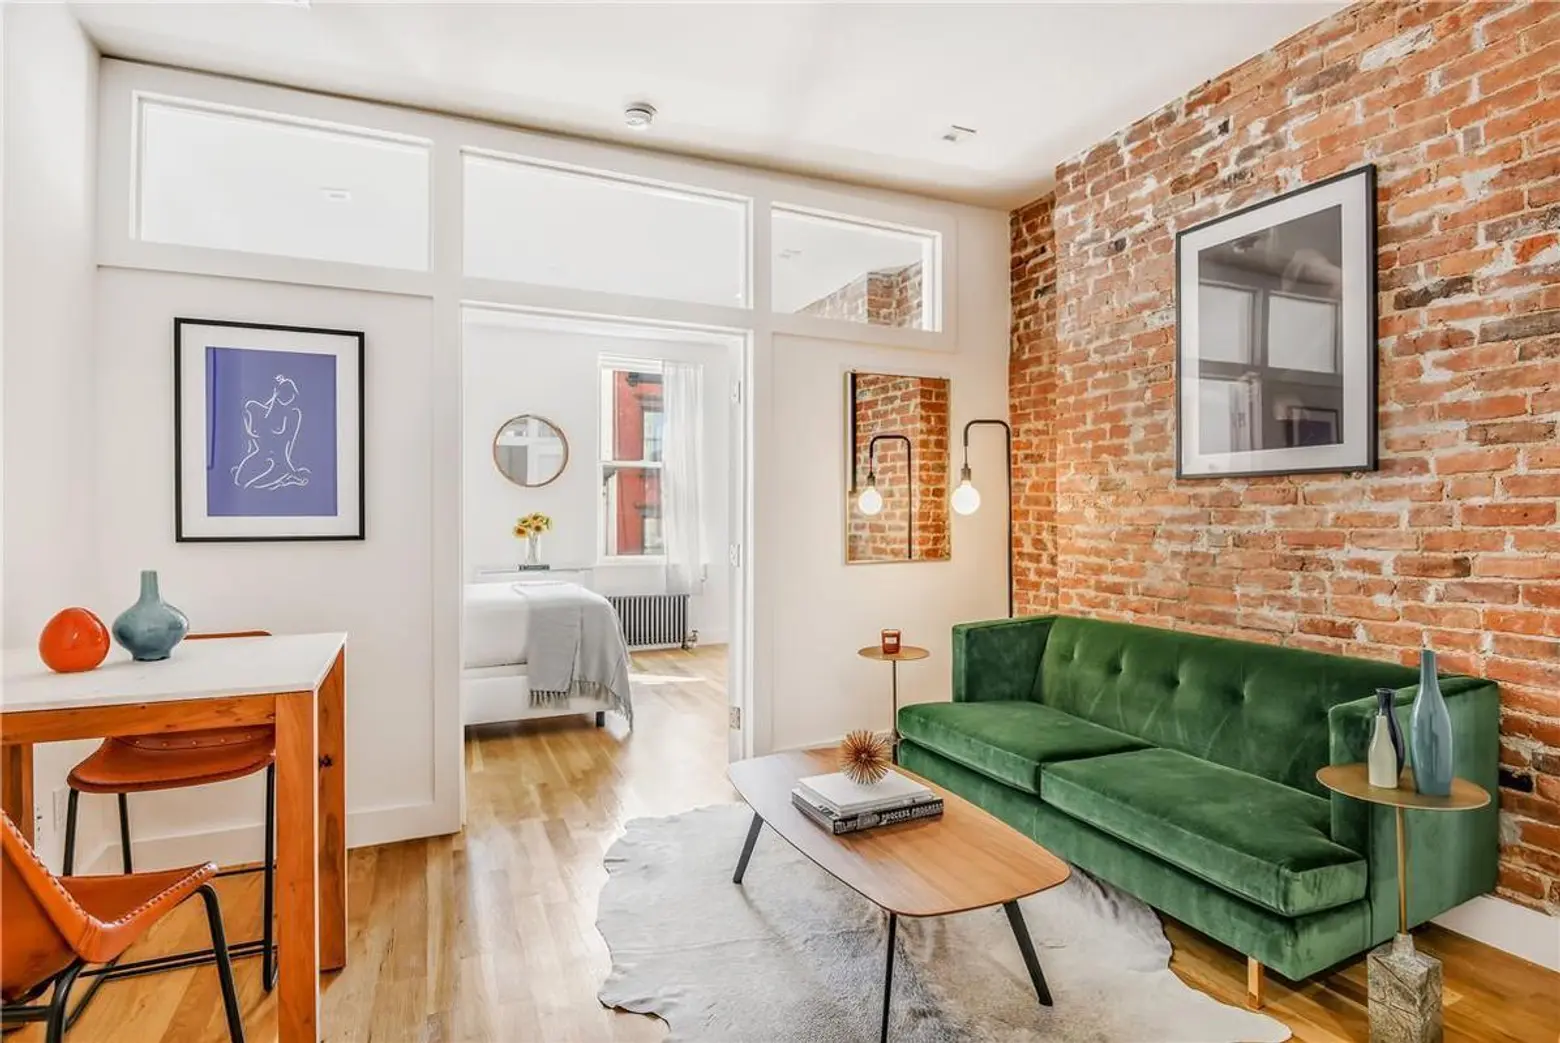 This slender West Village townhouse condo is well-located, well-dressed and just under $1M